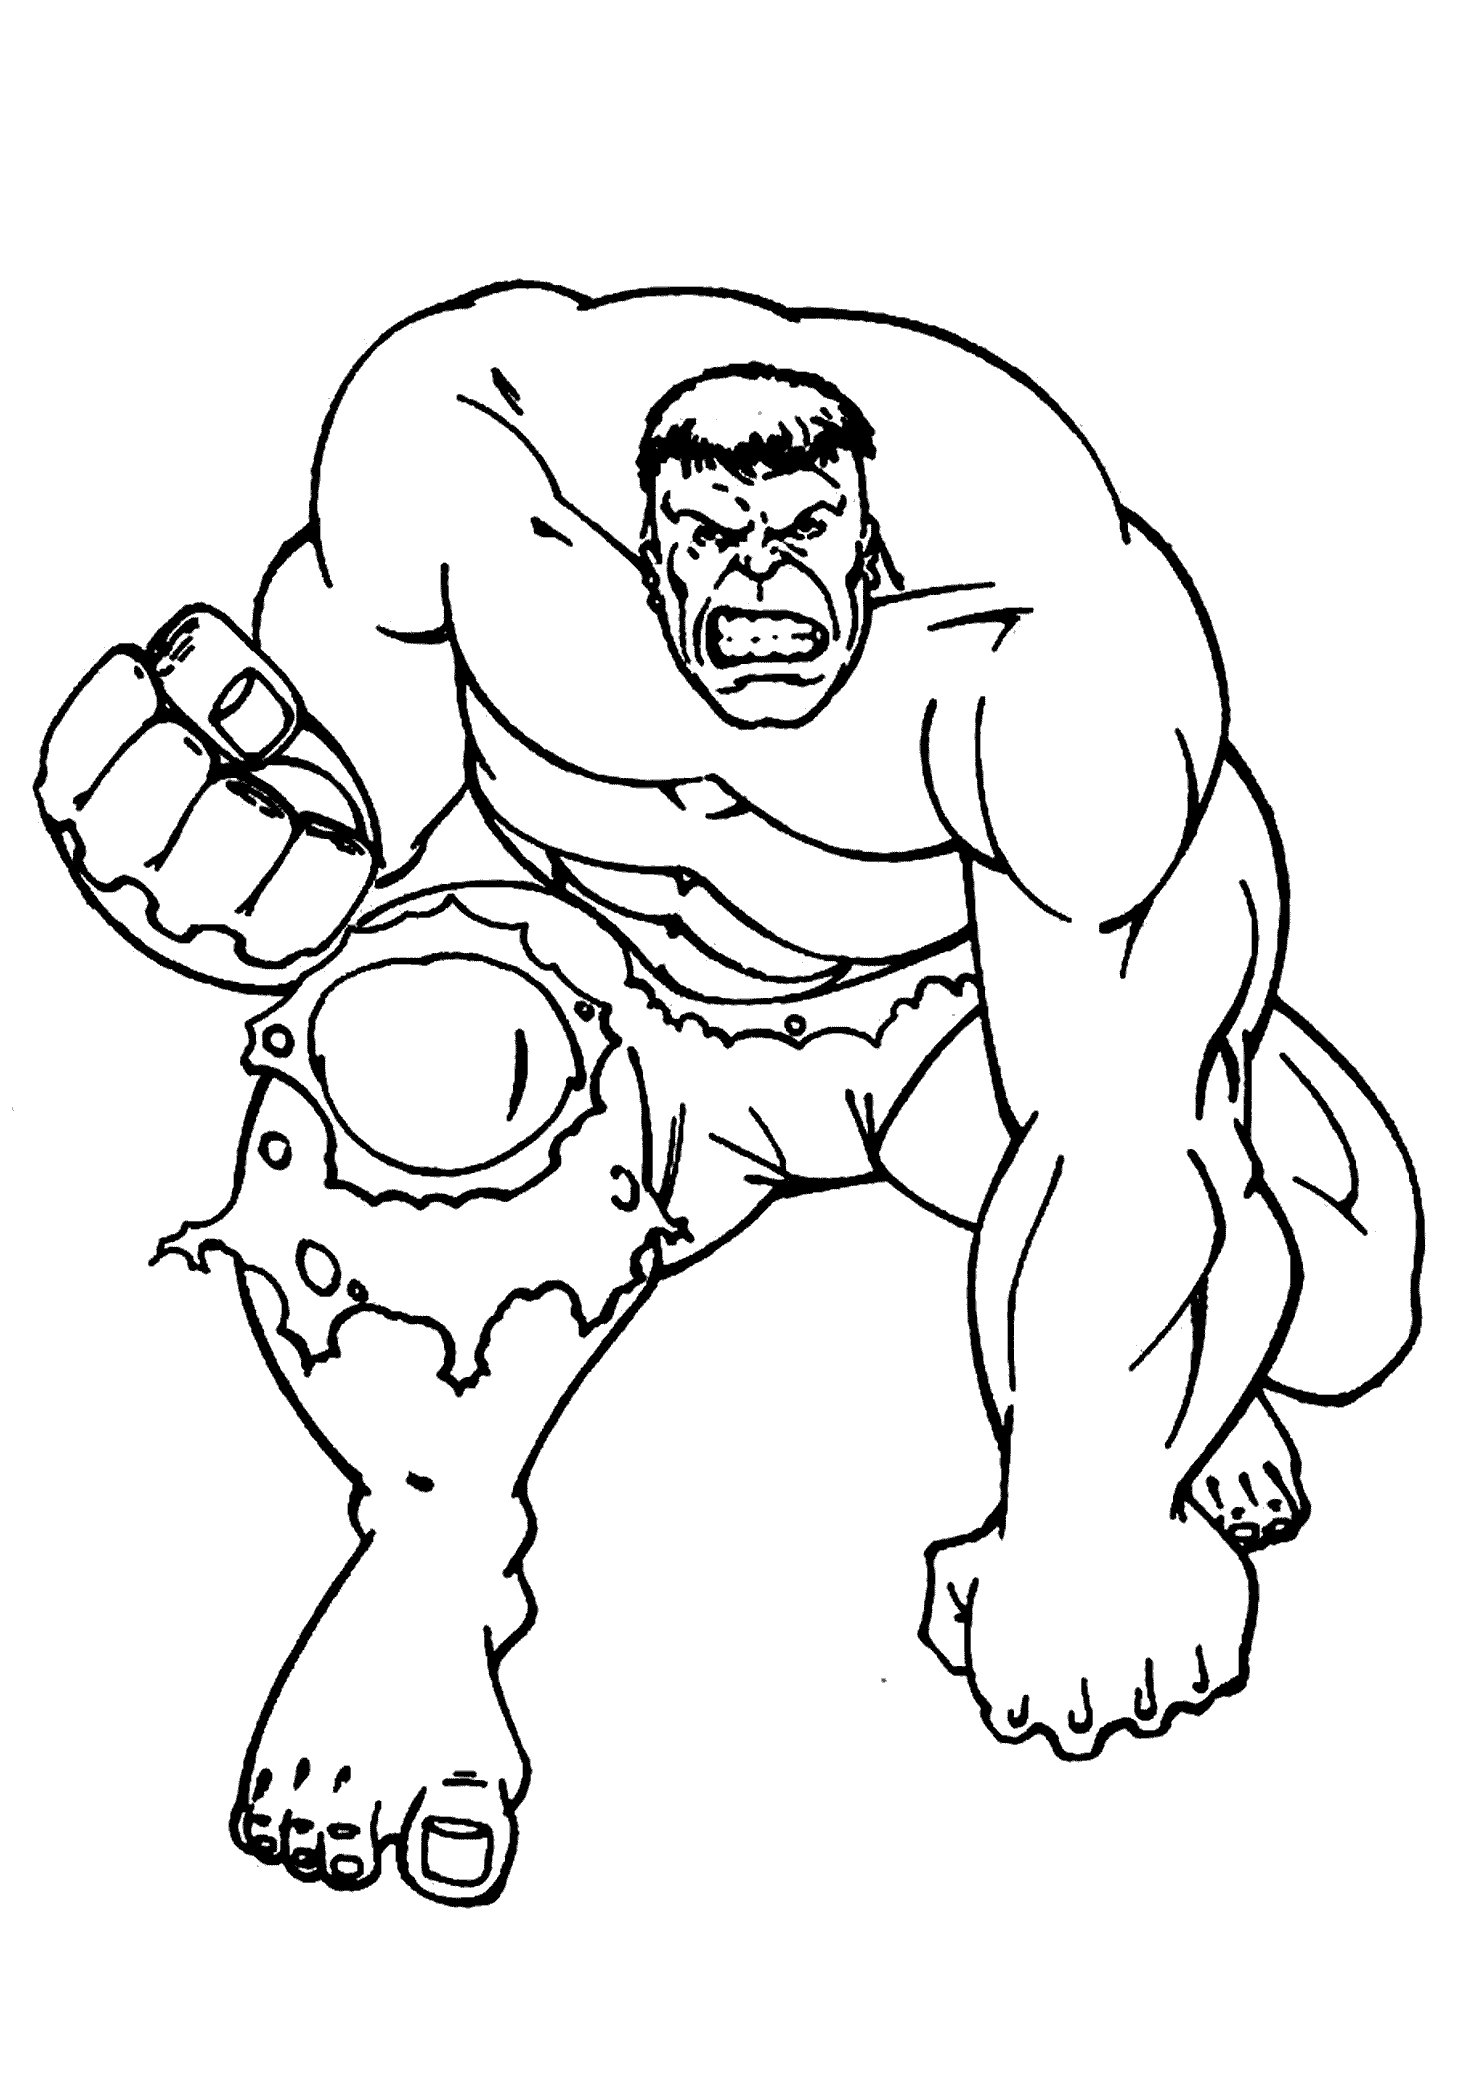 red hulk coloring pages red hulk pages coloring pages pages red coloring hulk 